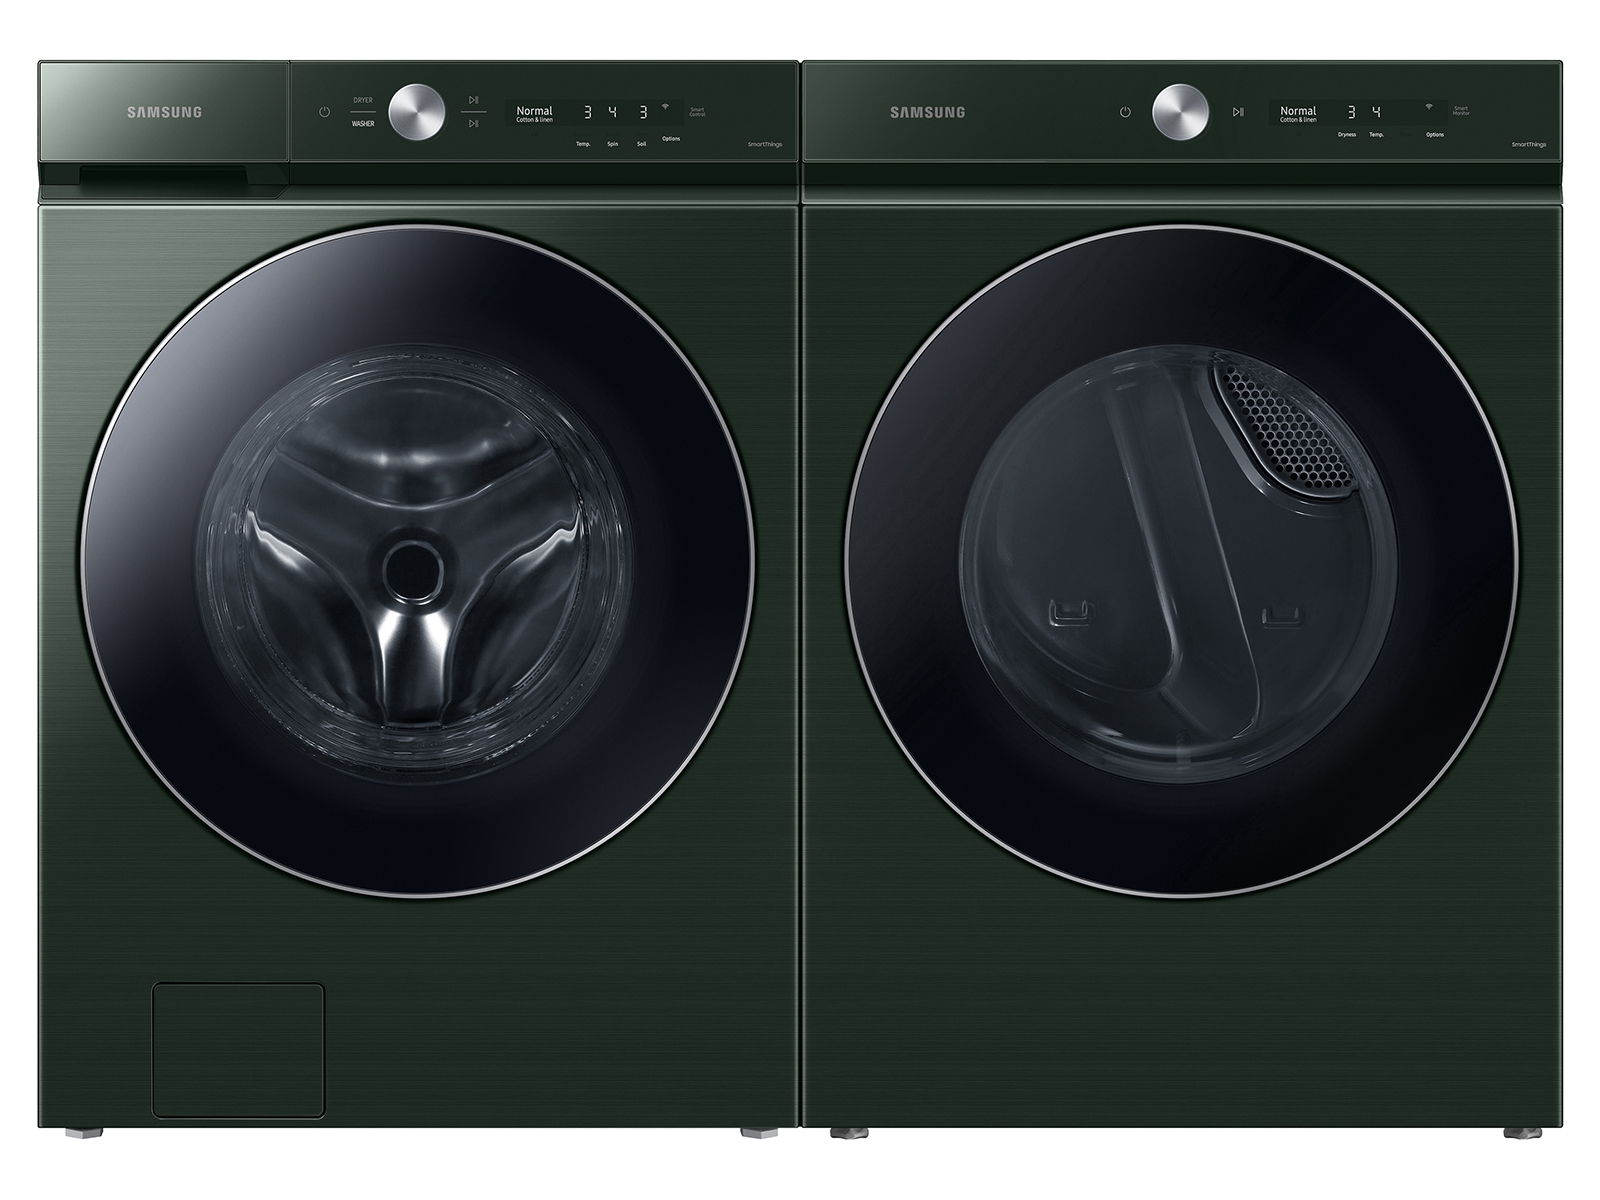 Photos - Tumble Dryer Samsung Bespoke Ultra Capacity Front Load Washer and Gas Dryer in Forest i 